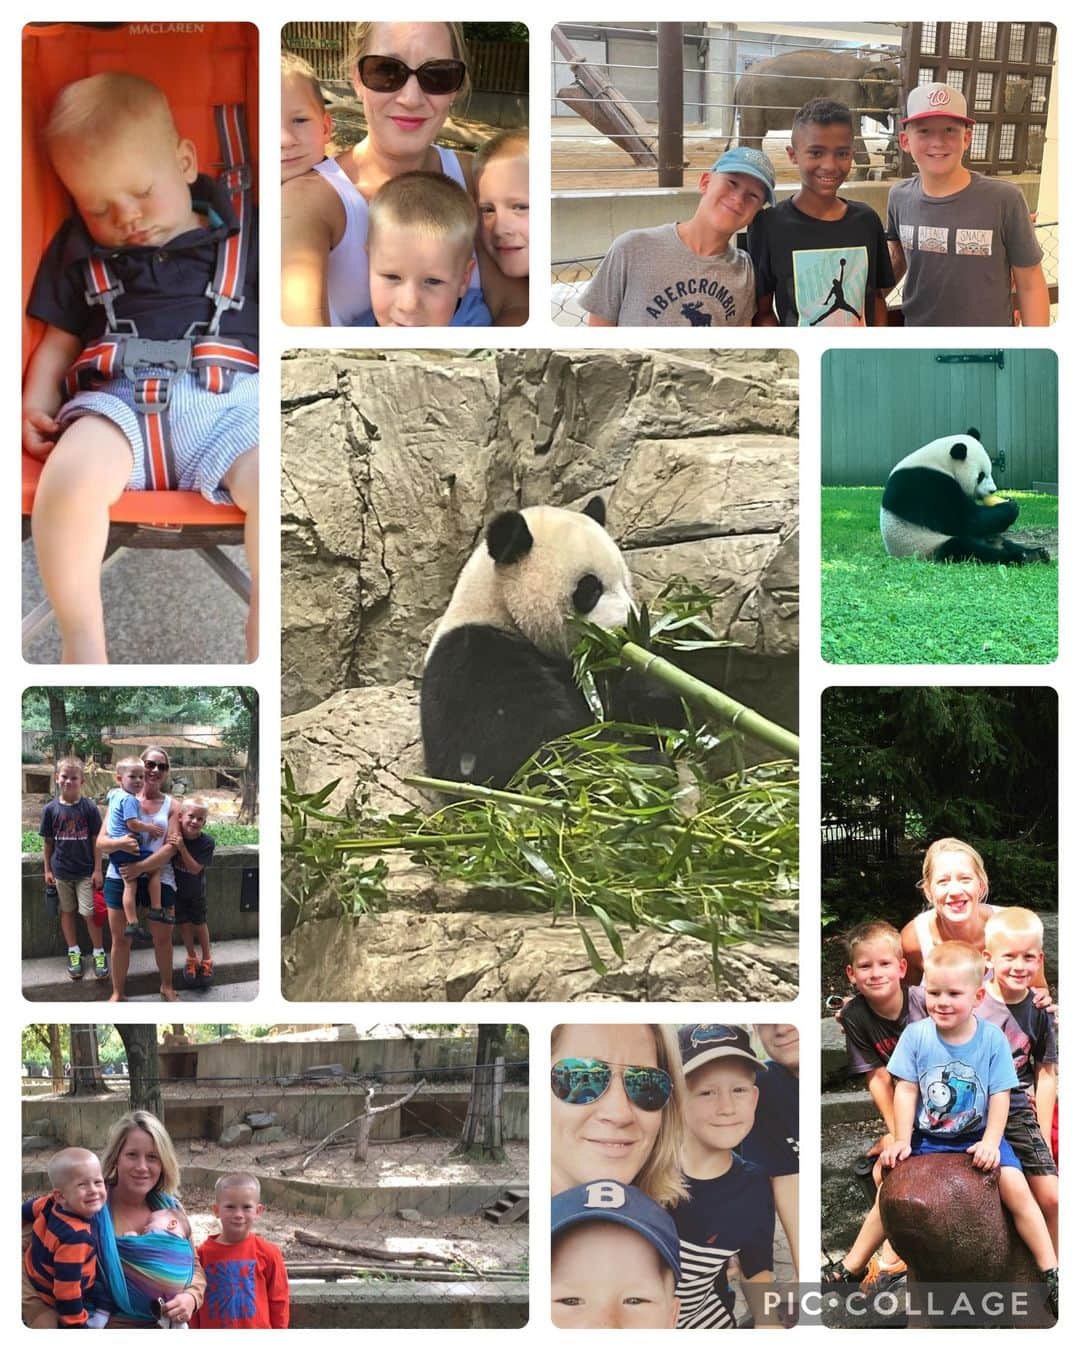 スミソニアン国立動物園さんのインスタグラム写真 - (スミソニアン国立動物園Instagram)「In honor of our giant panda program, we asked for your favorite memories of the Zoo's giant pandas over the decades. These are your stories. 🐼  "The last three panda babies are synonymous with my motherhood journey and my love affair with the National Zoo. I had my first baby in 2008; we started going to the Zoo regularly when Lucas was an infant (he napped in his stroller on his first trip), and we fell in love with Tian Tian and Mei Xiang--it was so special to have pandas at our Zoo. I had my second baby in 2011, and in 2012, I remember the joy and then the searing pain when Mei had, and lost, her baby.   The next year, I took my two little boys to see Bao Bao, the ball of black and white fluff, who we first watched on the PandaCam as a squealing stick of butter. We wept when she left but were overjoyed to welcome Bei Bei and then Xiao Qi Ji. Taking my now three boys to see the pandas has become a summer ritual for us. We pack a lunch of pasta salad and we know exactly when to arrive to get a good spot in lot B. We head for the Asia trail so we can see the pandas in their early morning glory. We've watched panda babies come and go as I've watched my own children grow from little boys into young men. The thought of losing our beloved Mei and Tian and the promise of new life that they bring makes me weepy, just as I weep at the thought of my own kids flying the nest. It’s been so comforting to know that those magical, spotted, black-and-white balls of fluff would be there, munching on frozen watermelon and bamboo or rolling in the snow. They are part of the background music of my life as a mother. What a hole they will leave.” - Leigh T. of Maryland  Image description: a collage of 9 photos, showing a woman and her 3 sons. The photos range from pictures of babies to school aged children. Two photos are of pandas at the National Zoo.」10月26日 3時59分 - smithsonianzoo